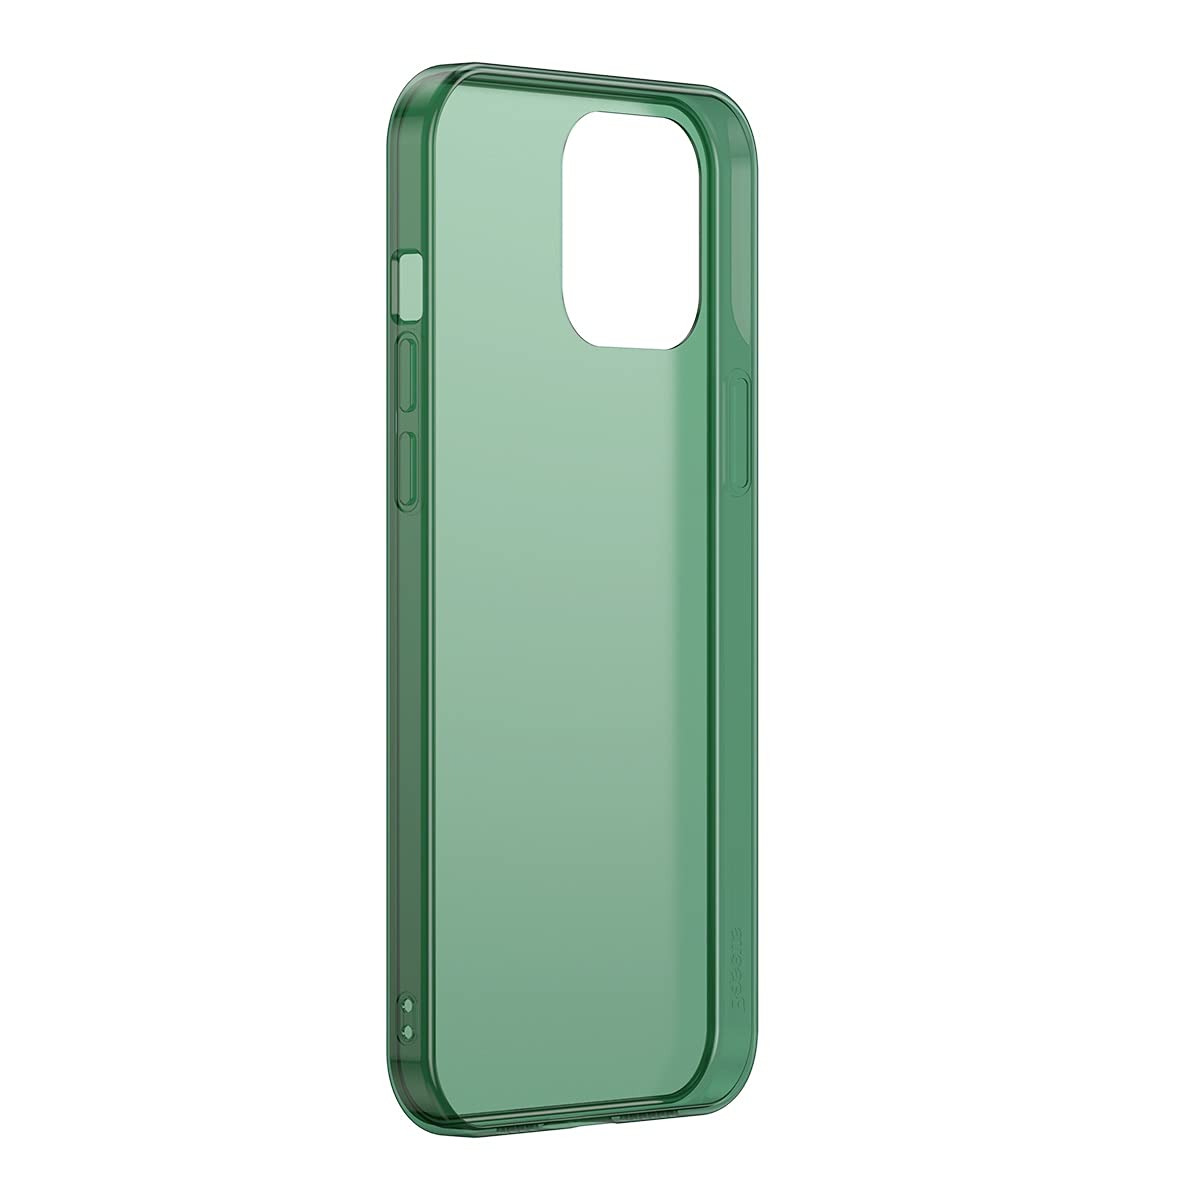 Baseus Frosted Glass Protective Case for iPhone 1212 Pro 6.1 in Green